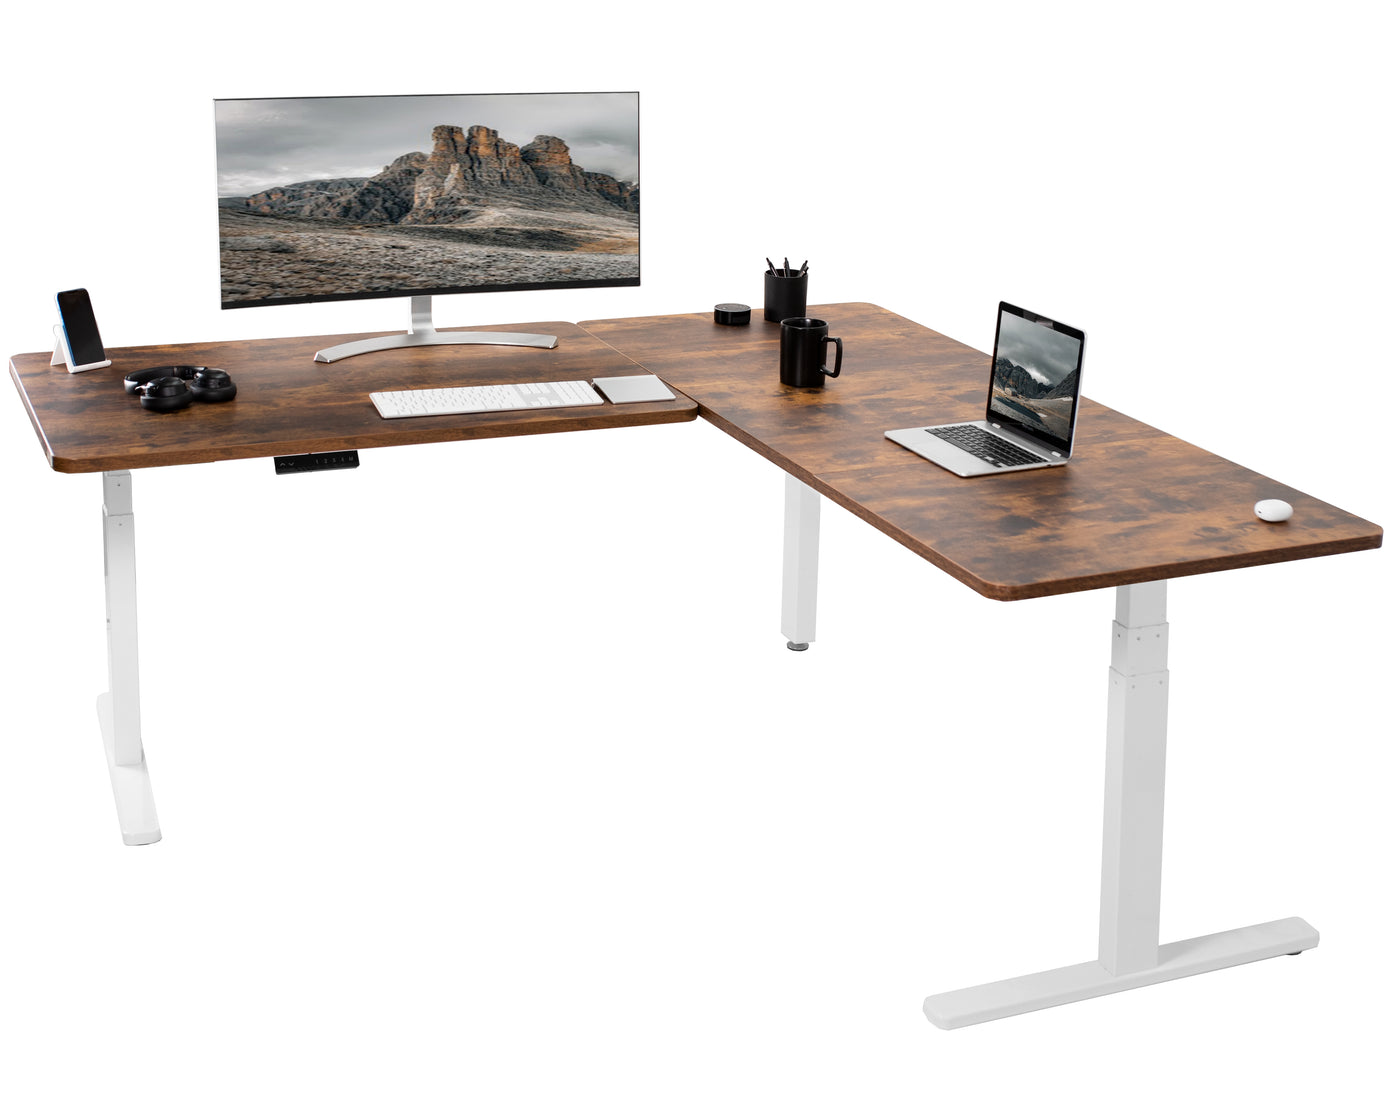 Enjoy a spacious workstation that accommodates an active work life with the Rustic Corner 77" x 71" Electric Desk